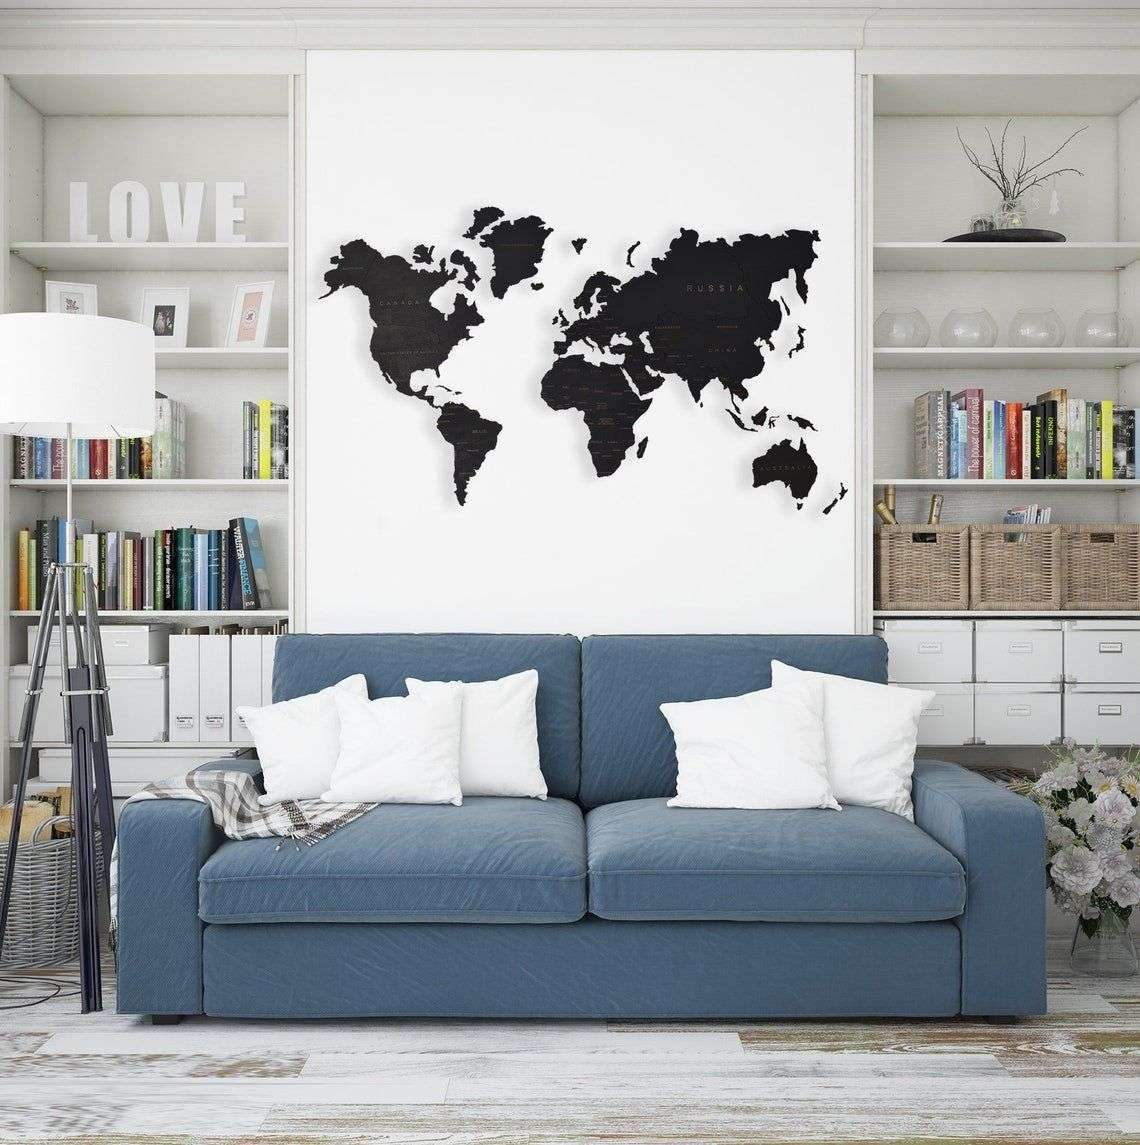 Wooden World Map – XXL – 98×57 inches (250×145 cm) / Blank map